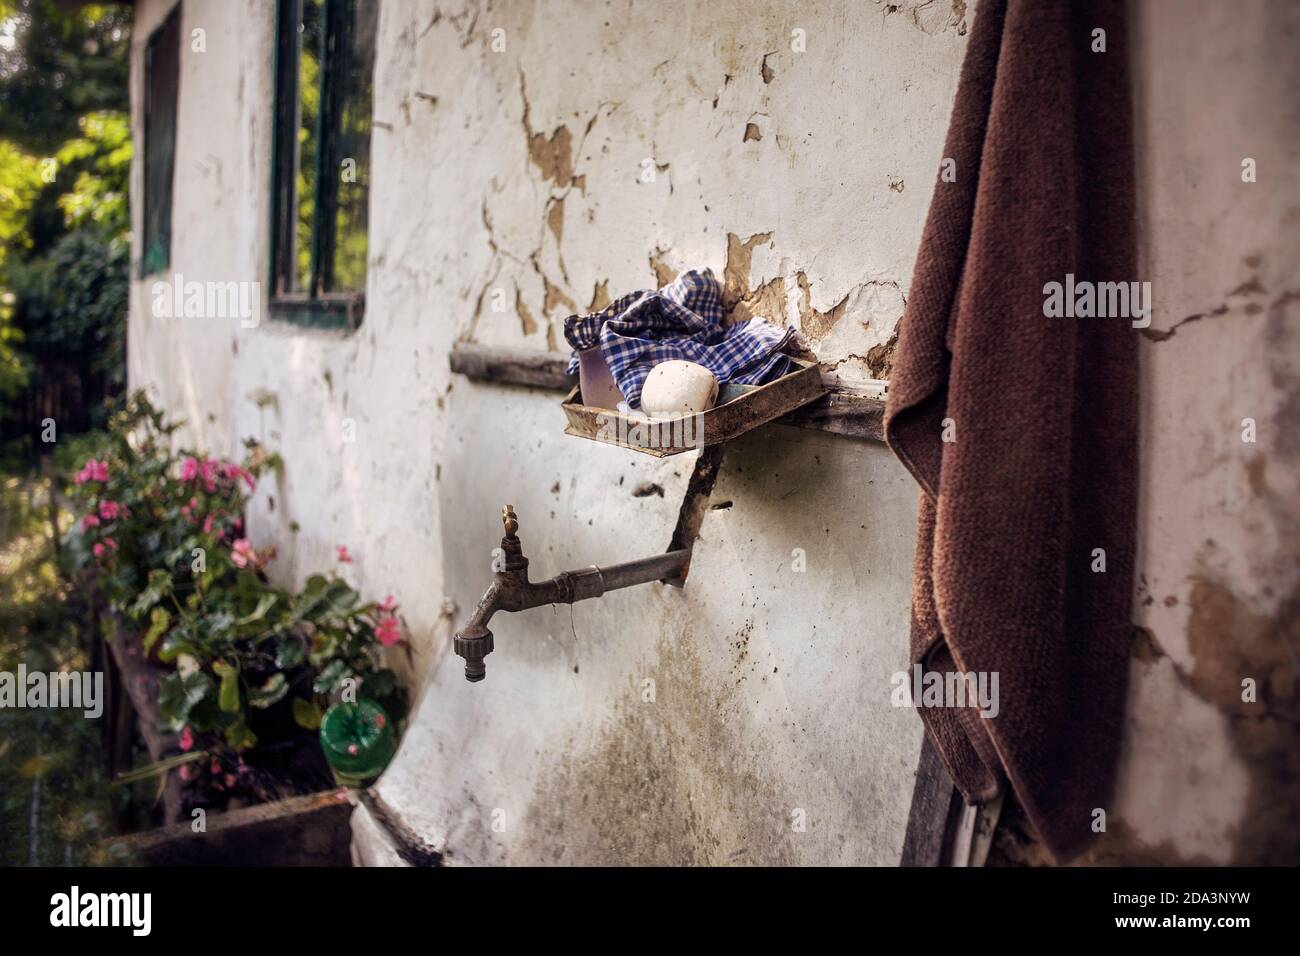 An outdoor faucet on a house wall with soap in a poor Serbian village. Stock Photo